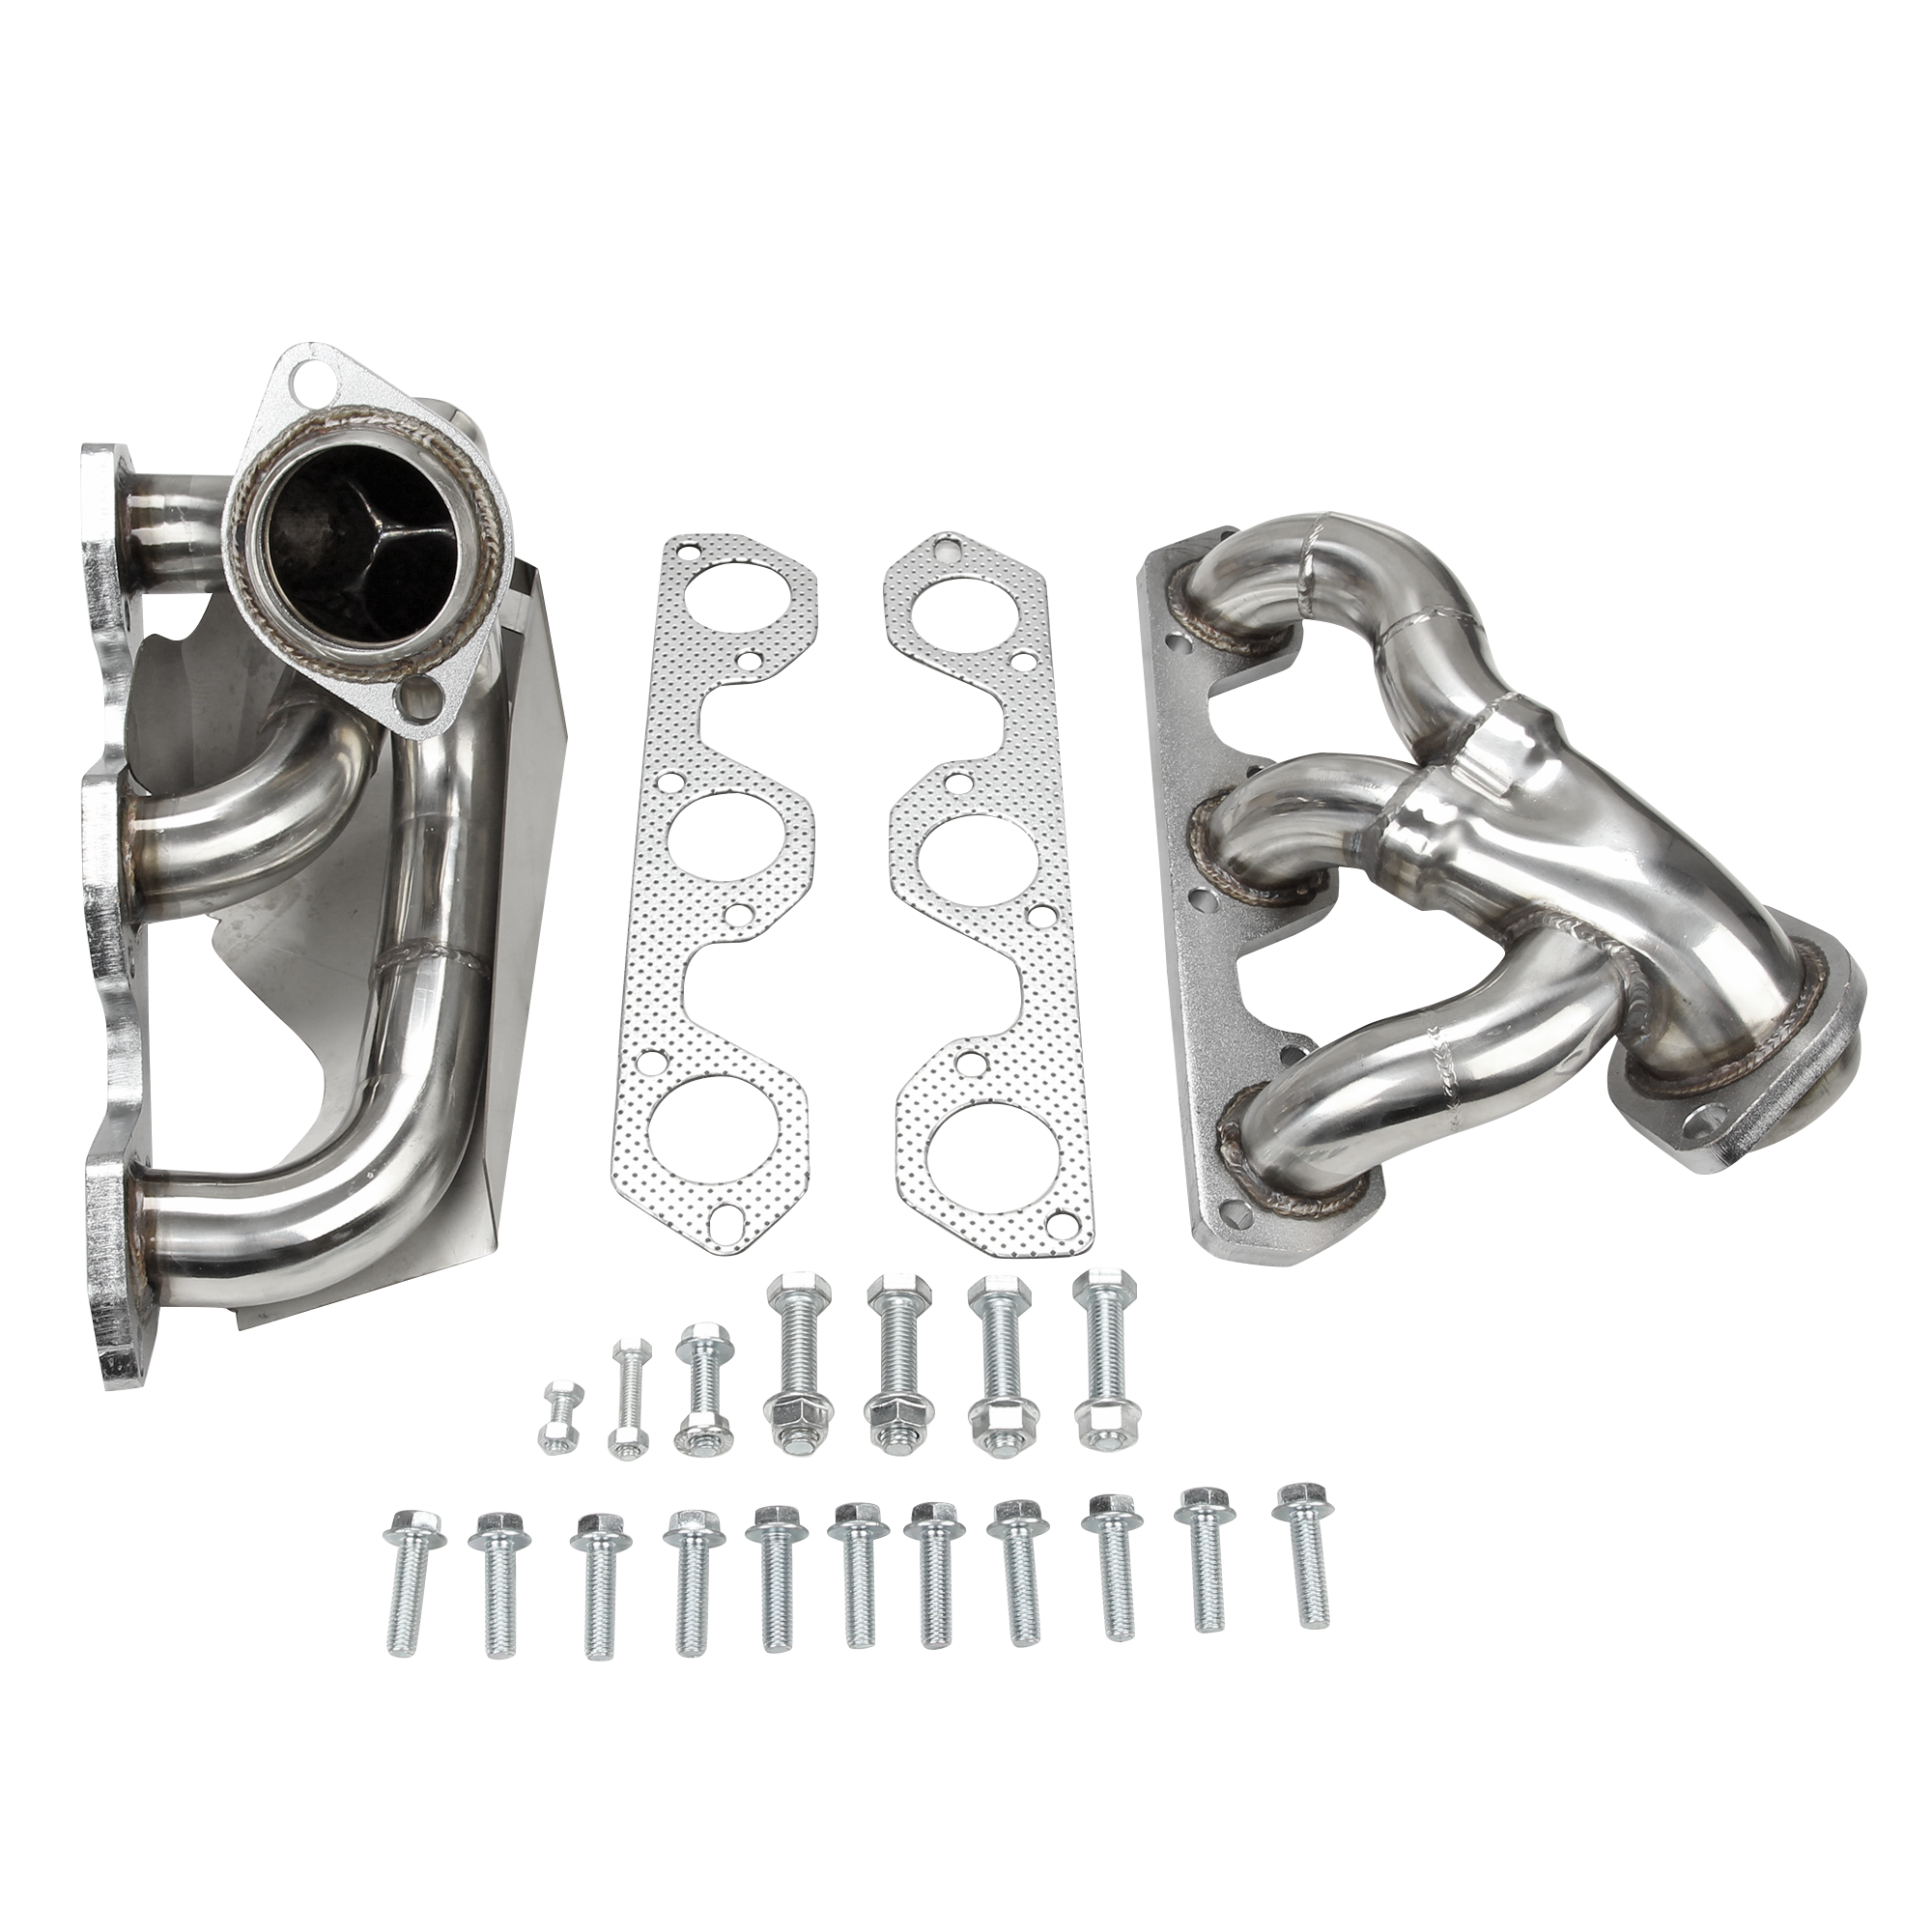 Exhaust Headers Manifolds for 2007-2011 Jeep Wrangler 3.8L V6 with Gasket Set